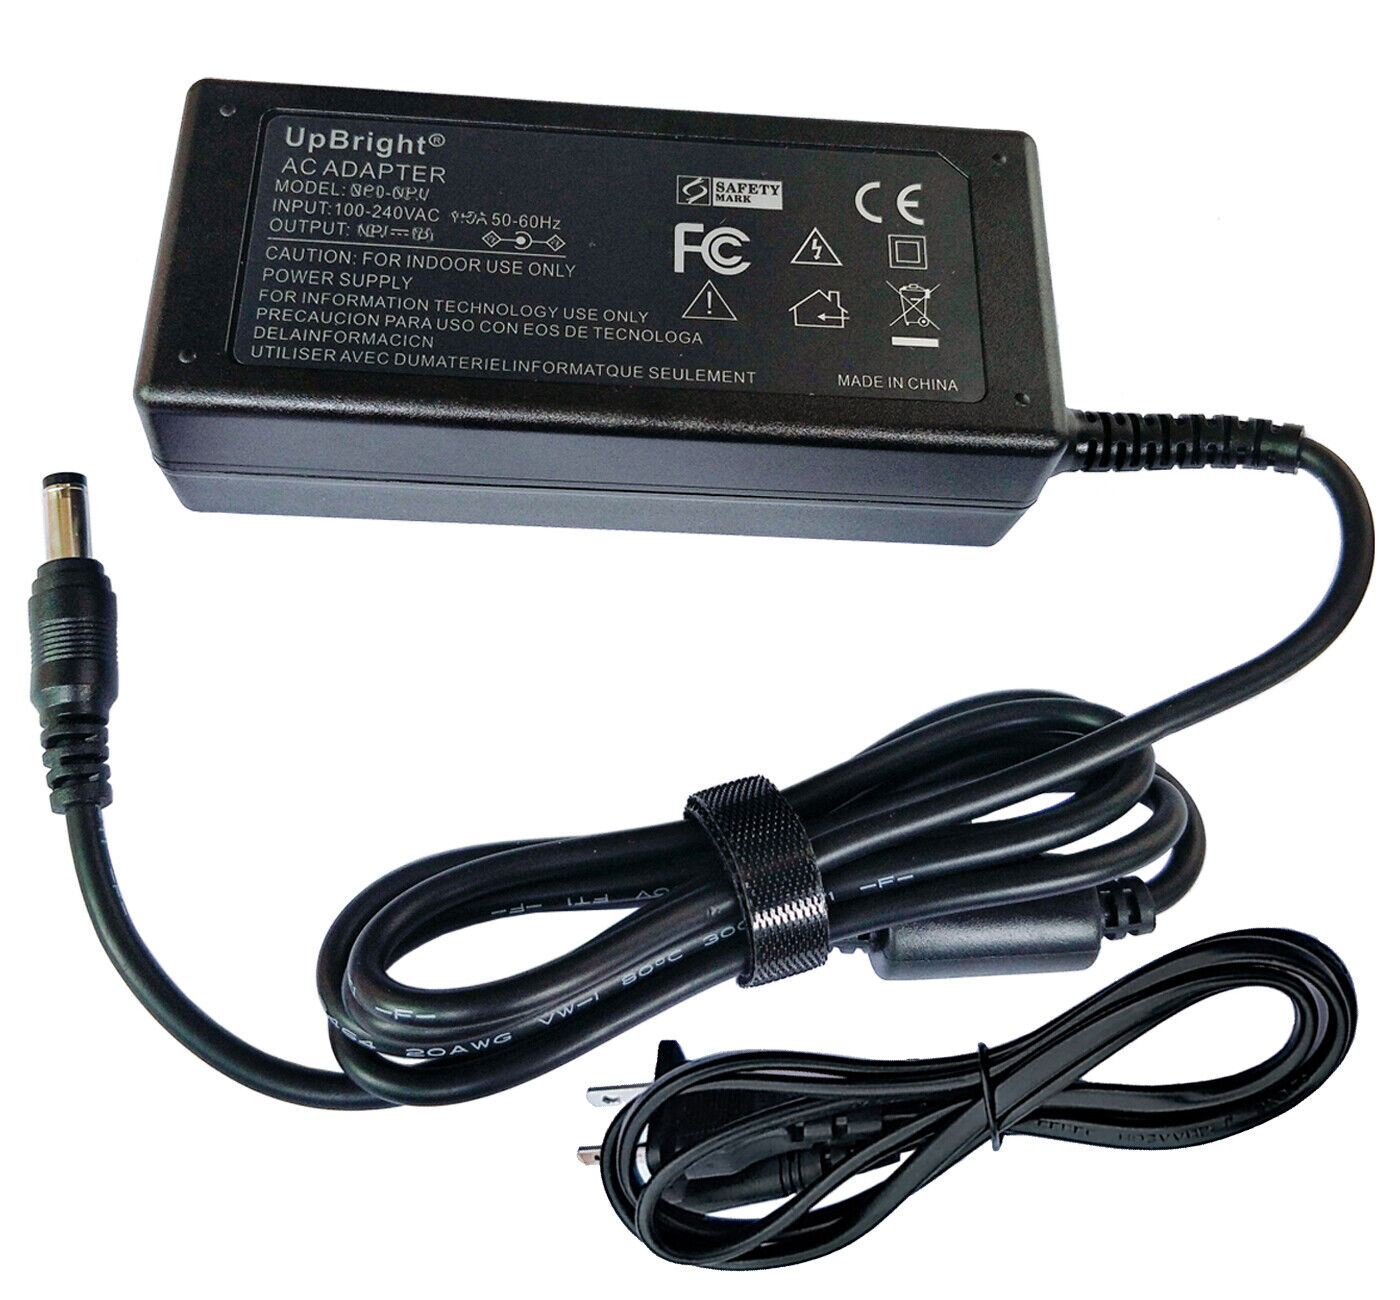 AC Adapter Or Car Charger For Jackery Explorer 1000 E1000 Portable Power Station